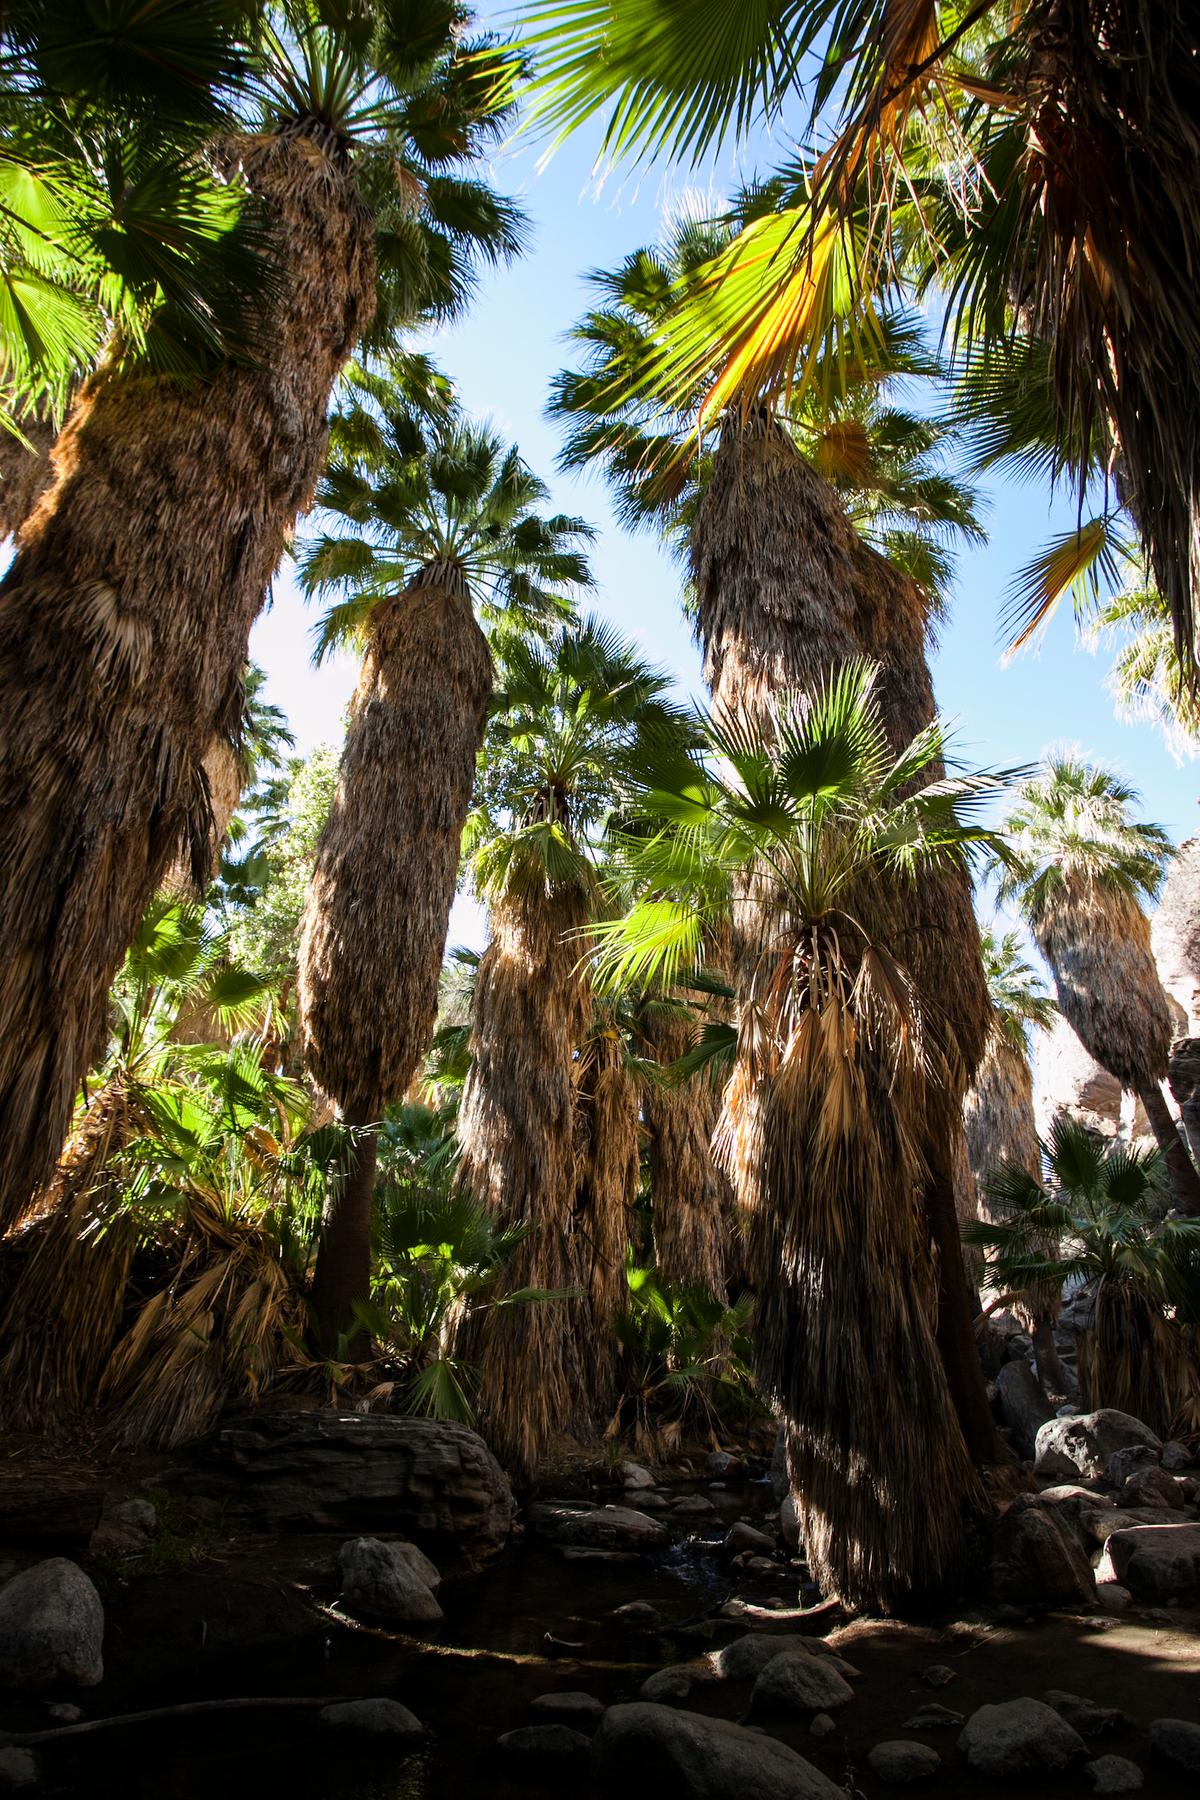 A canyon in Palm Springs, Calif. (Channaly Philipp/The Epoch Times)